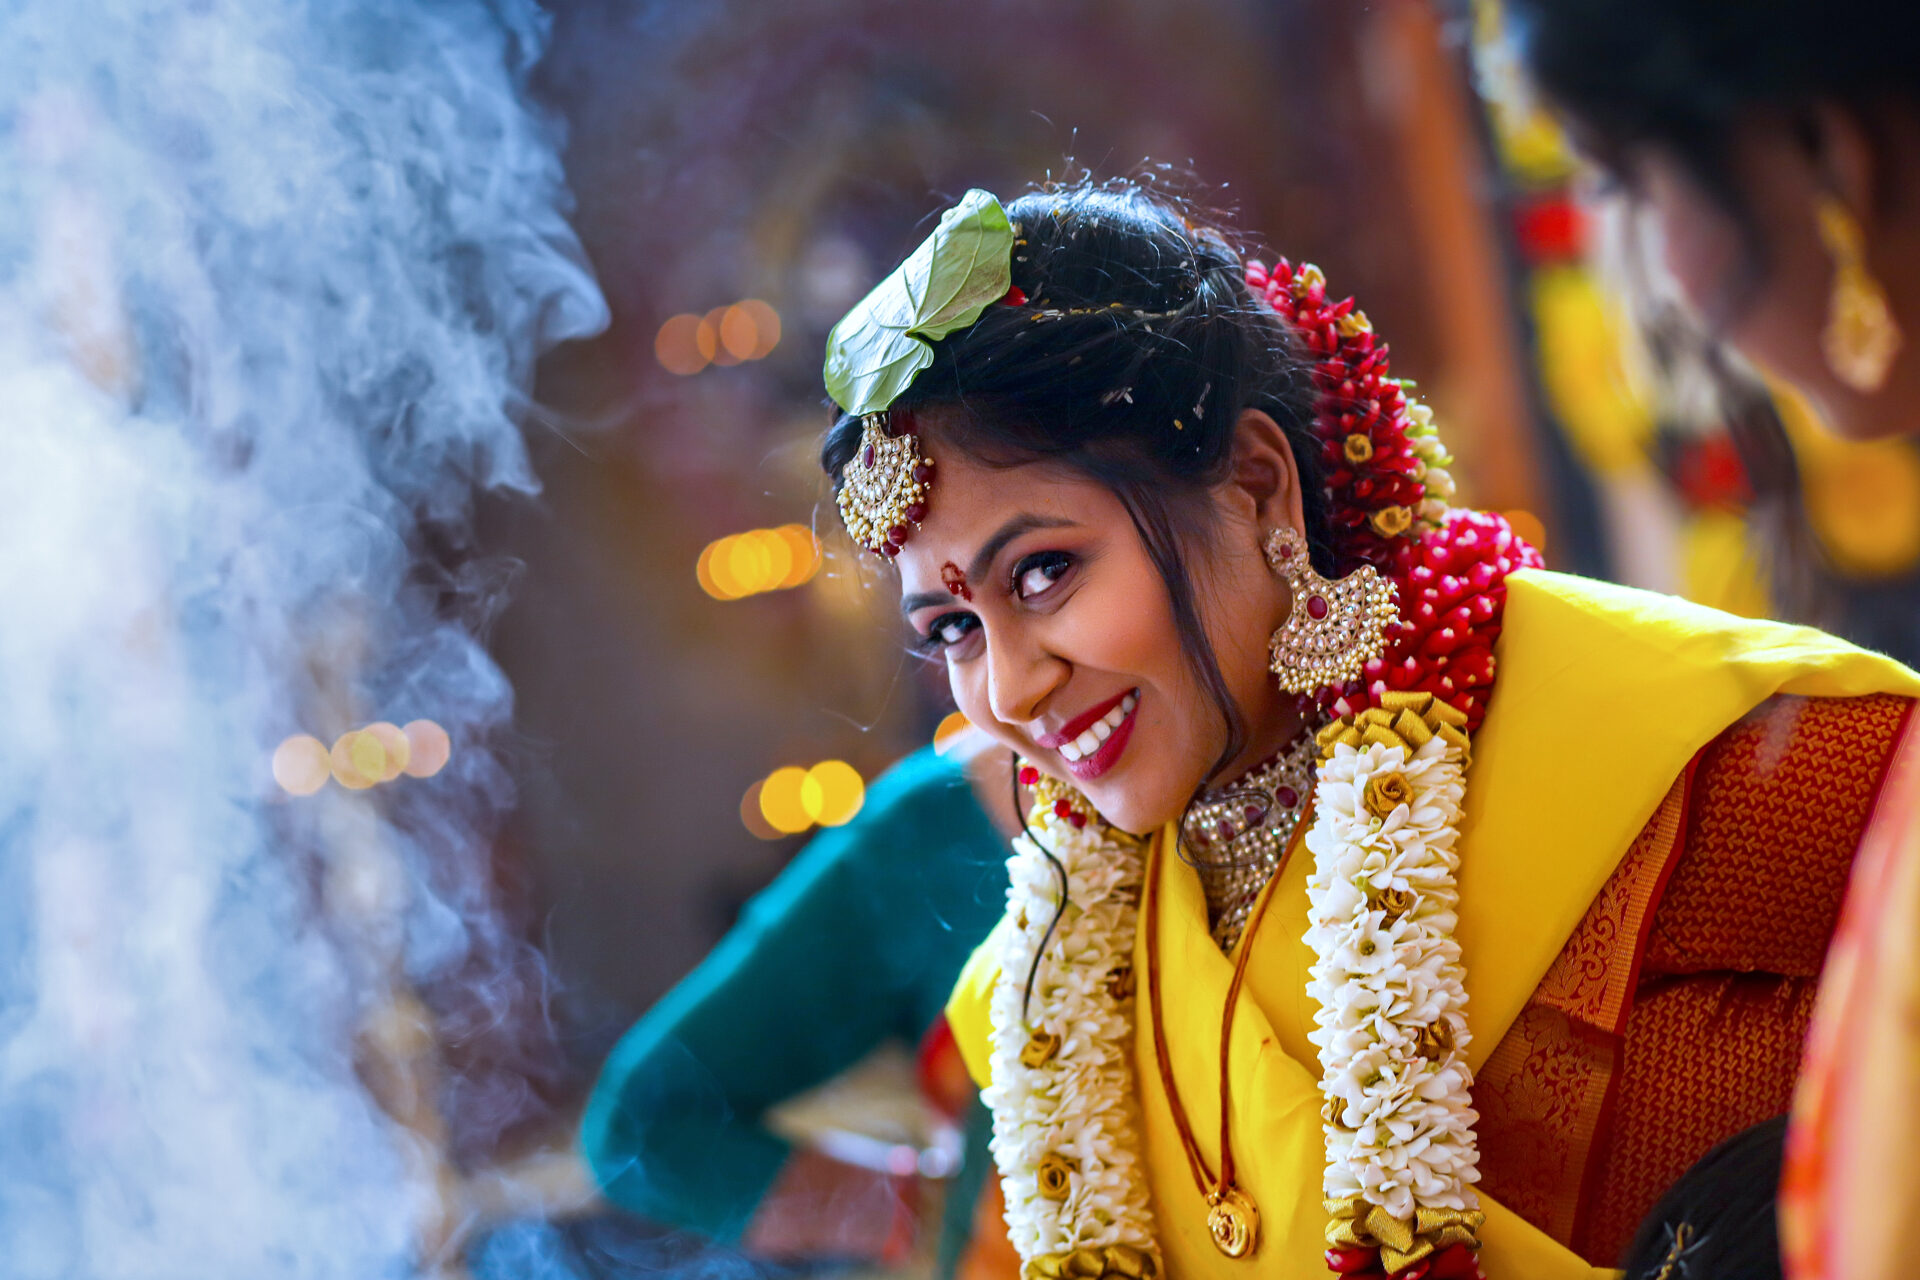 A Magical Photoshoot with Kalyan and Neelam - Let Us Capture It!"